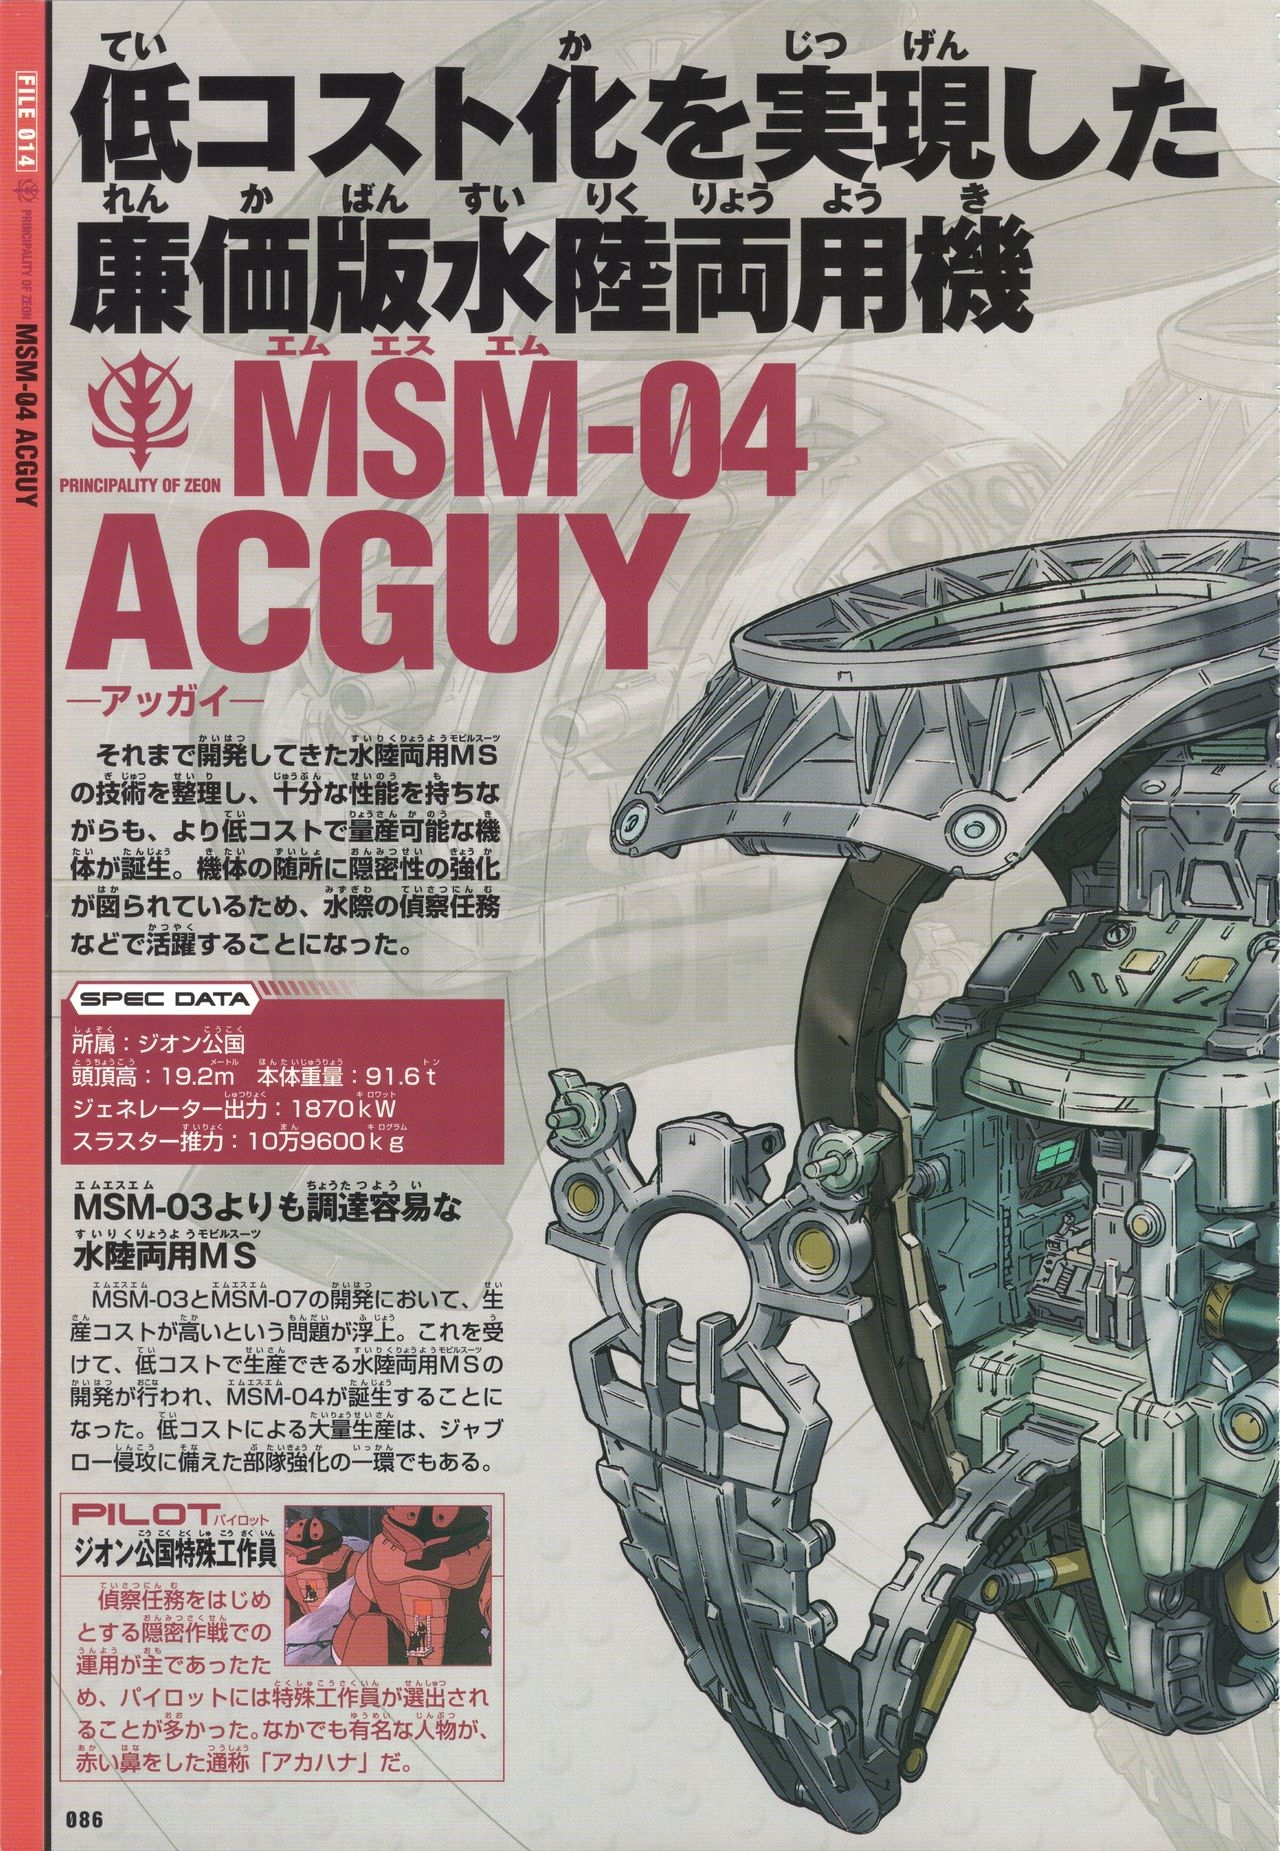 Mobile Suit Gundam - New Cross-Section Book - One Year War Edition 90